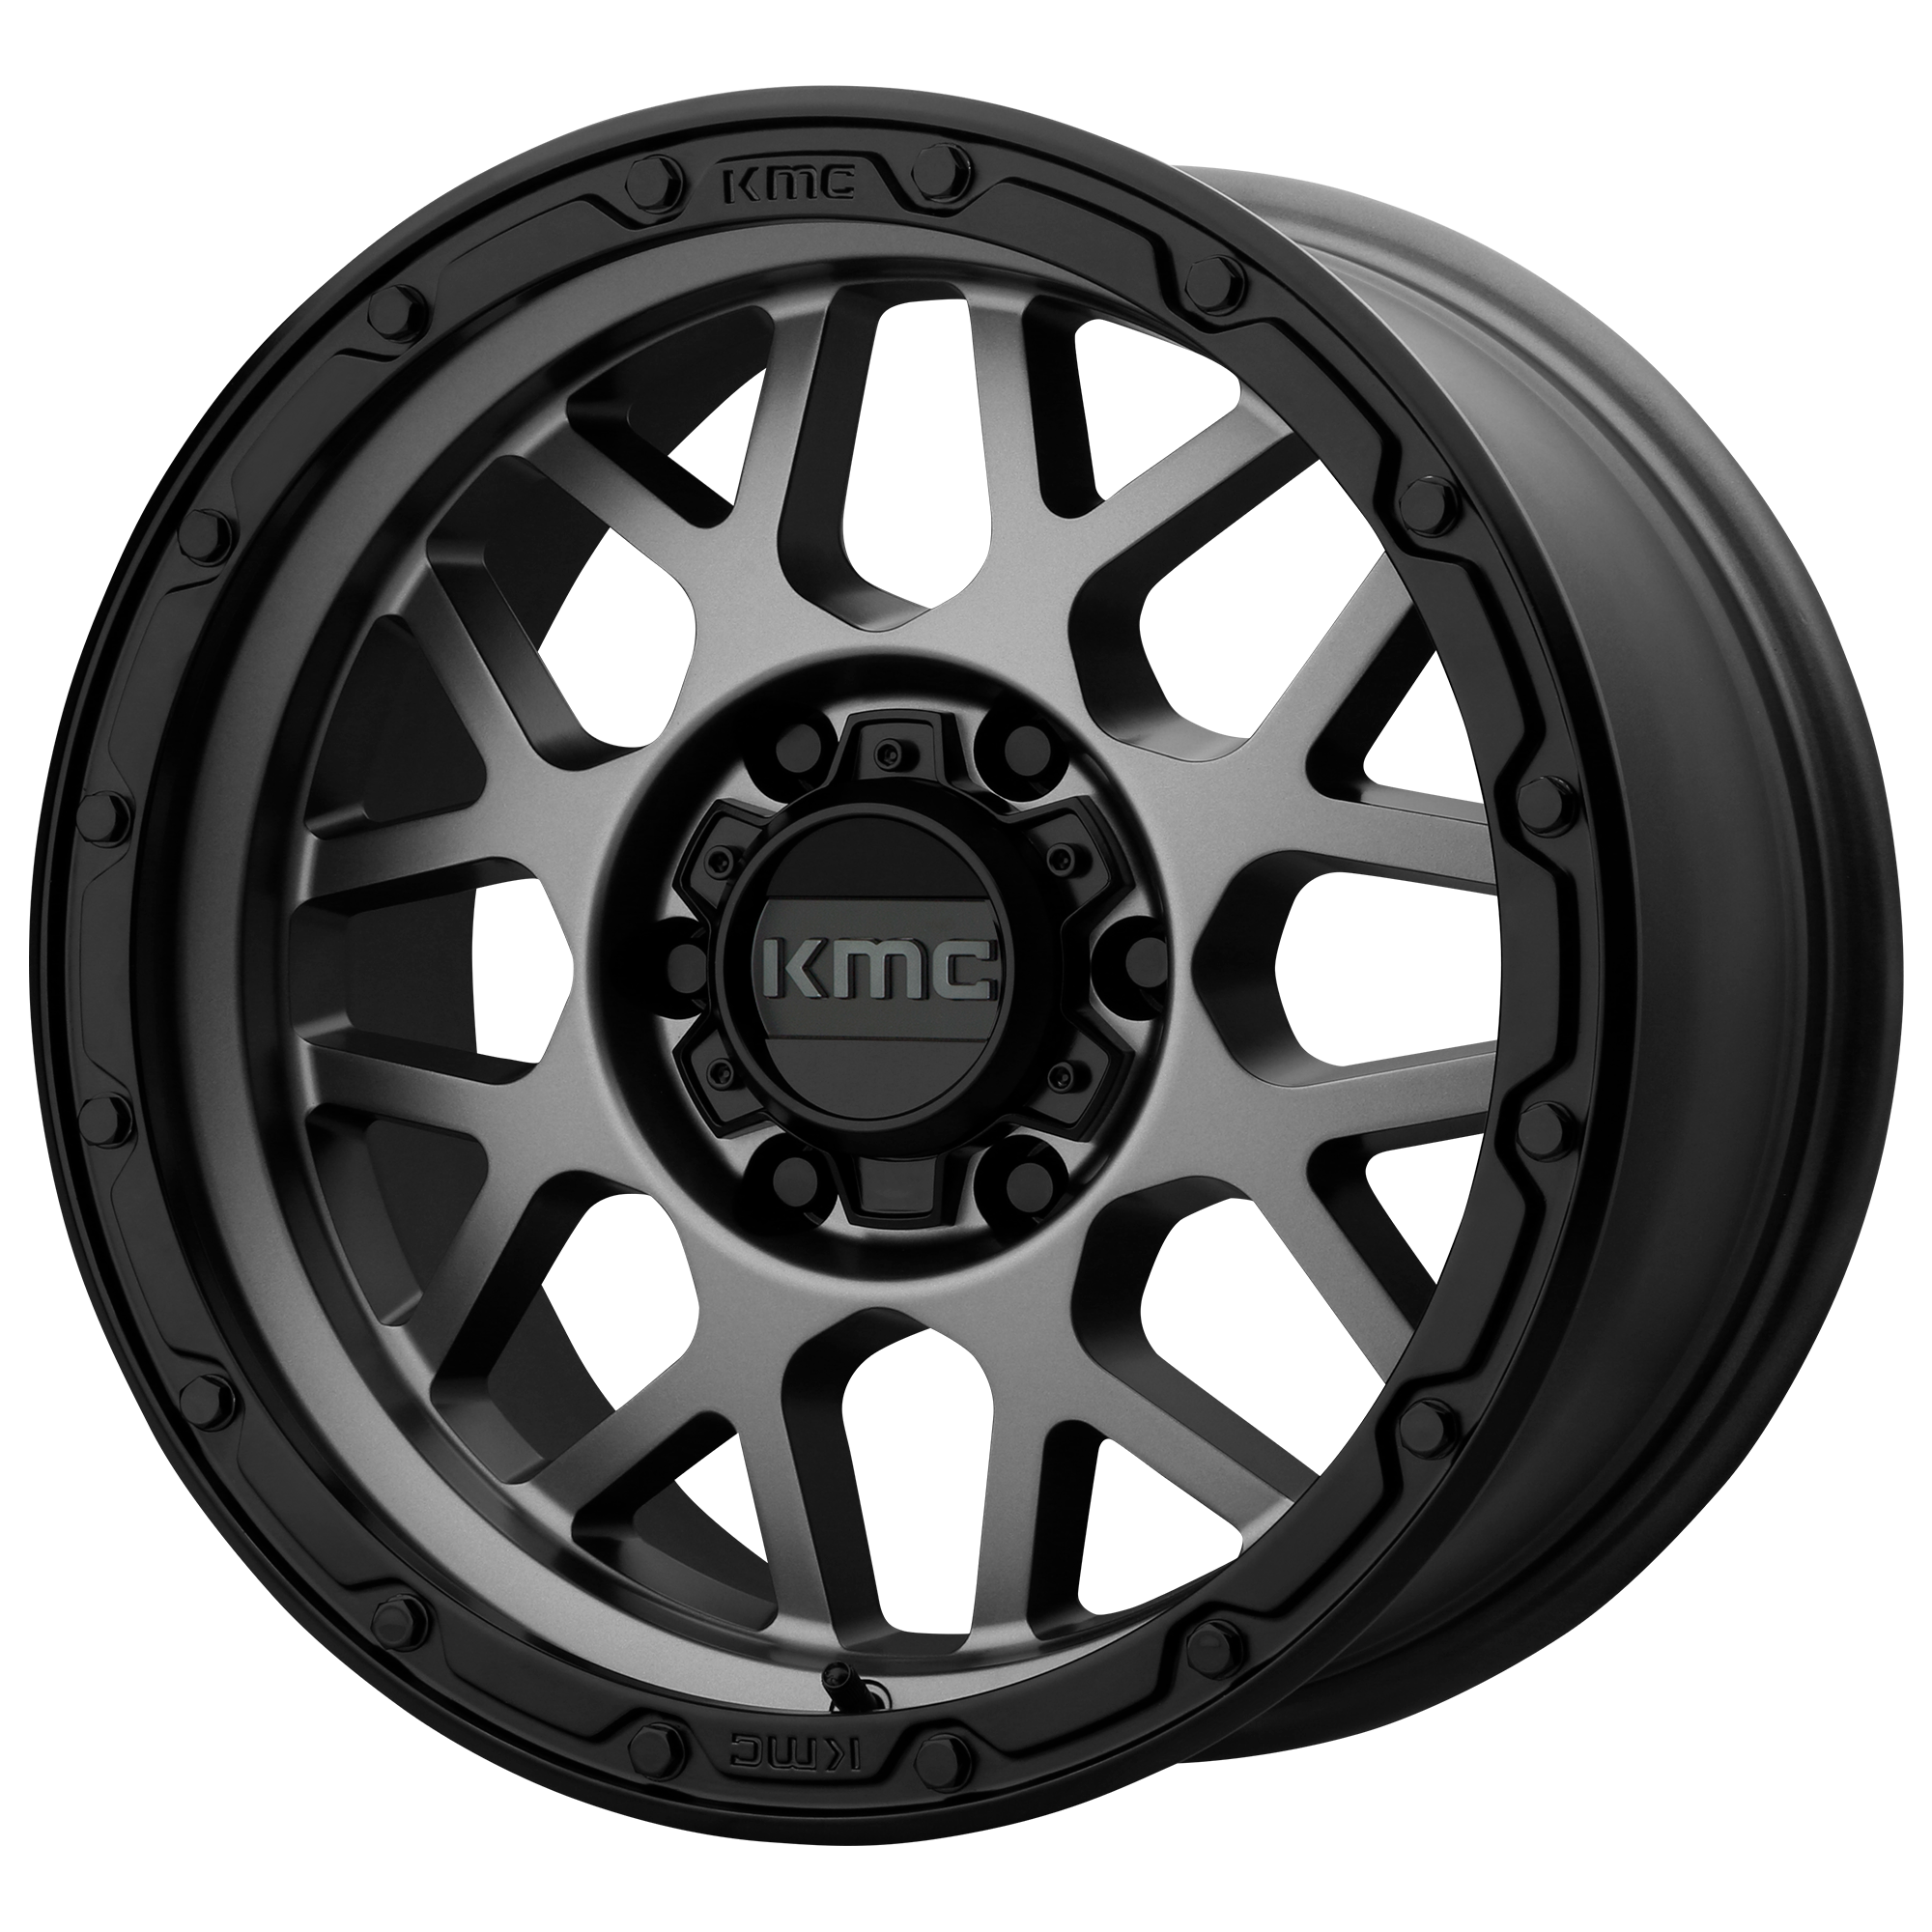 GRENADE OFF-ROAD 17x9 6x135.00 MATTE GRAY W/ MATTE BLACK LIP (18 mm) - Tires and Engine Performance